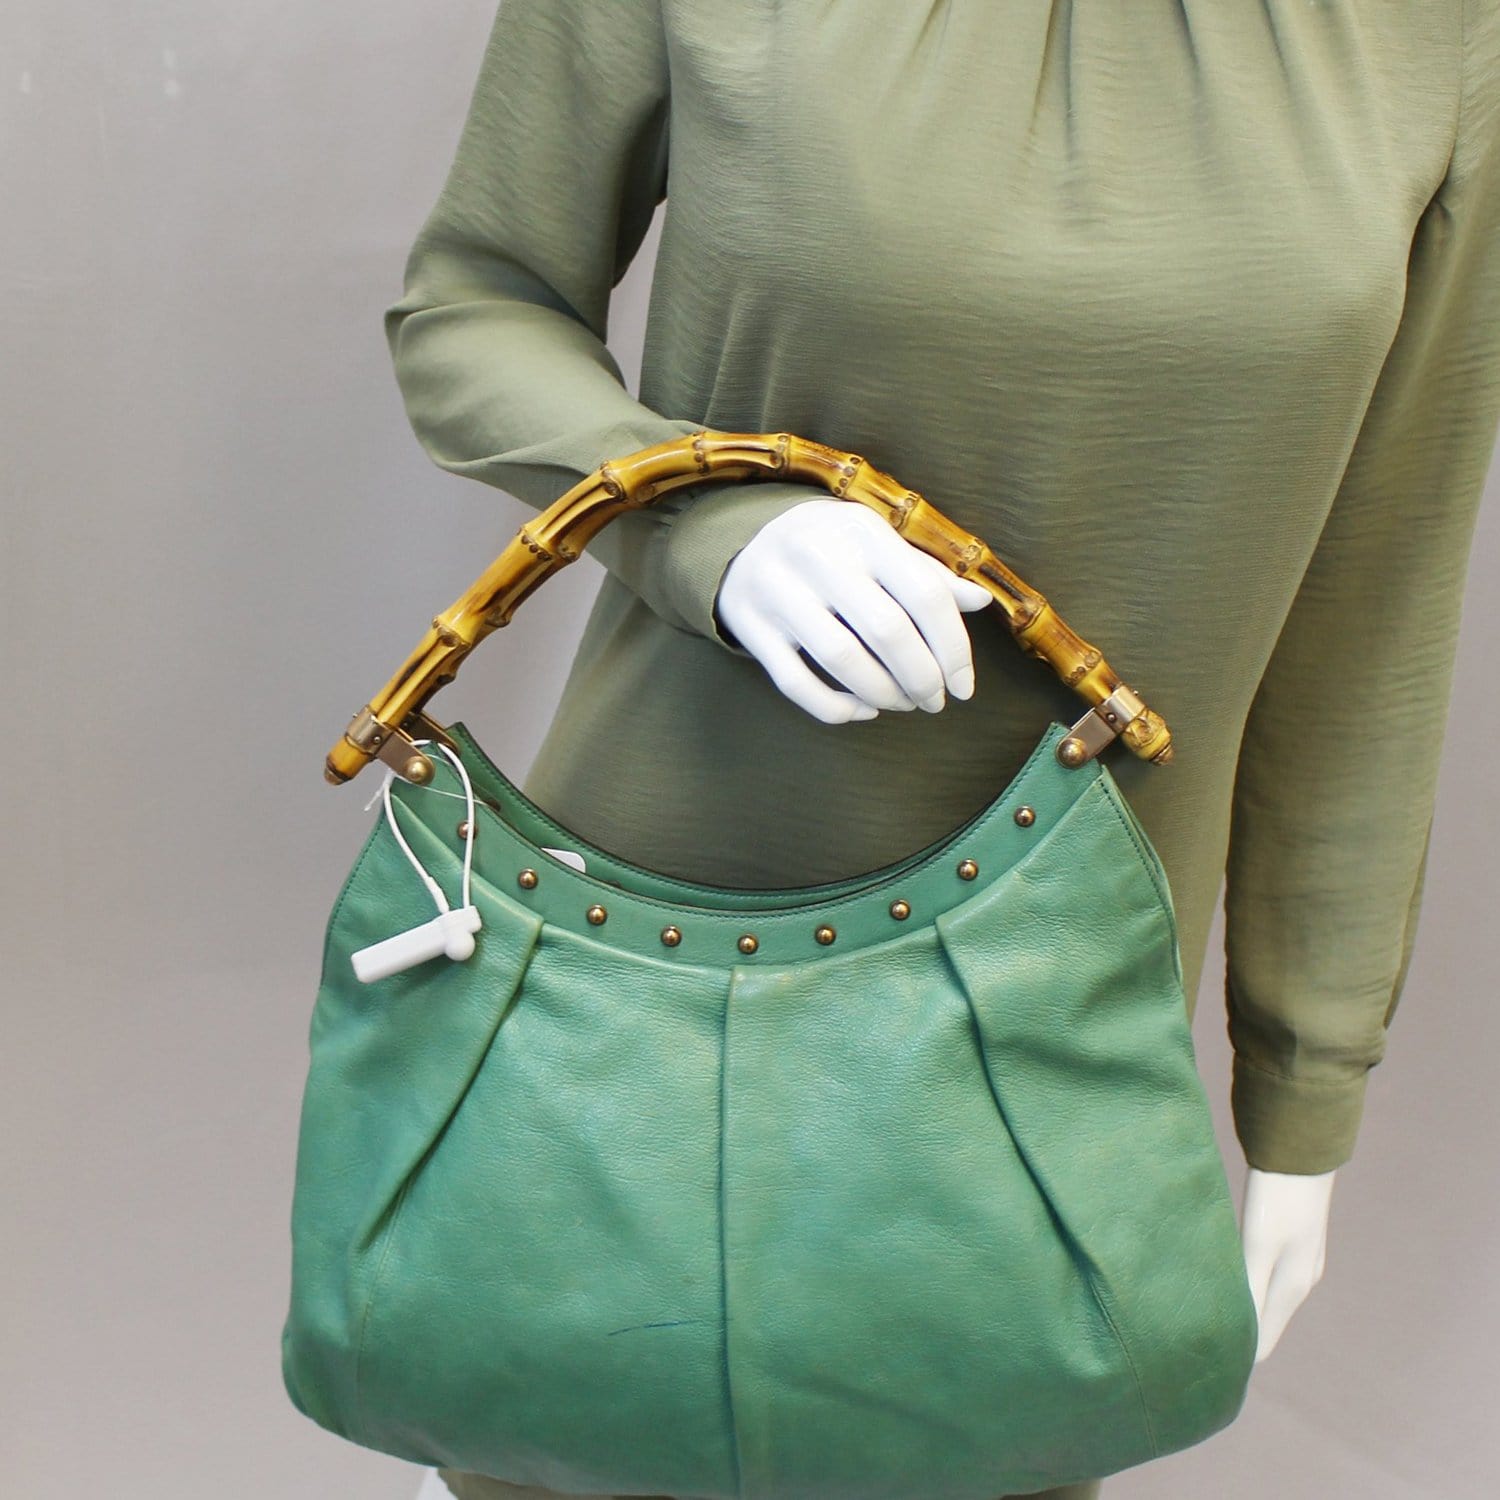 Authentic GUCCI Bamboo Shoulder Tote Bag Nylon Leather Khaki Green